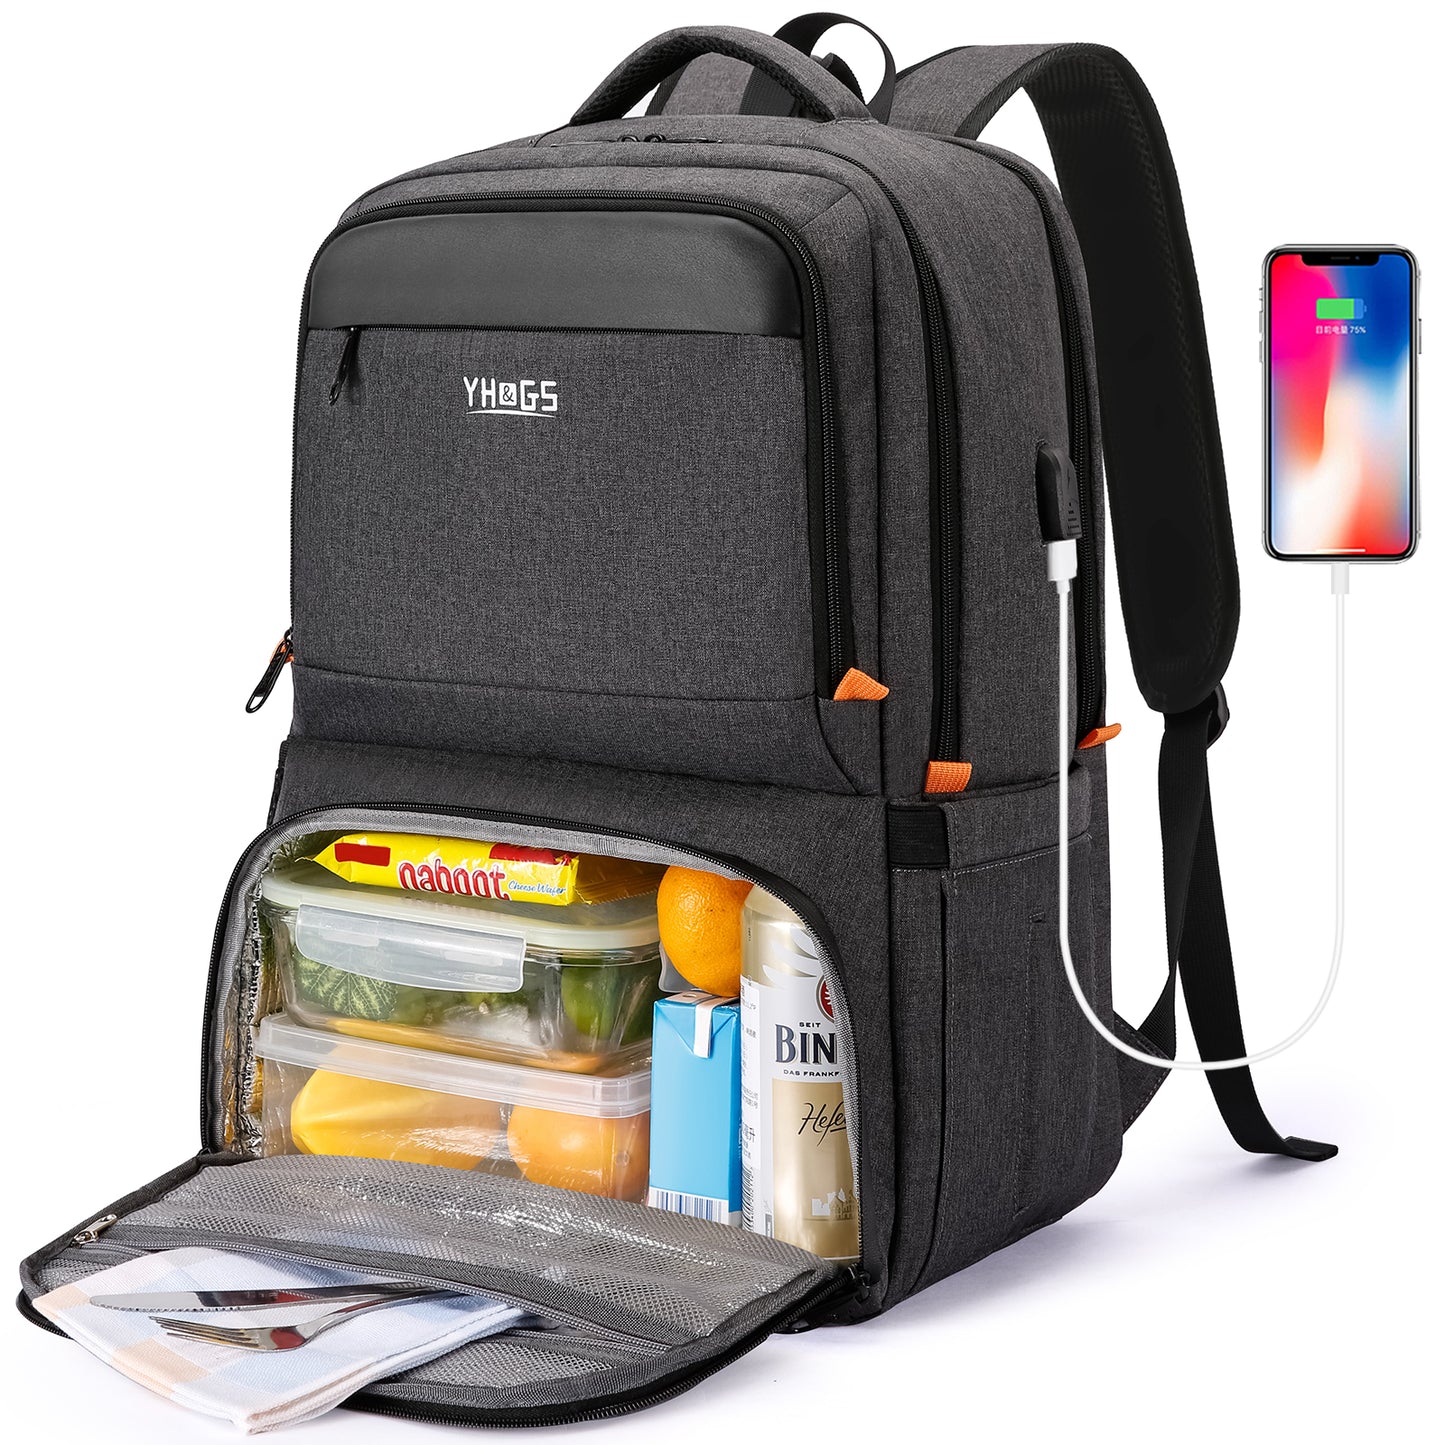 Lunch Backpack, Insulated Cooler Backpack Lunch Box for Men Women, 15.6 Inches RFID Blocking Laptop Backpack with USB Port, Water Resistant Leak-proof Lunch Bag for Work School Picnics Hiking Black